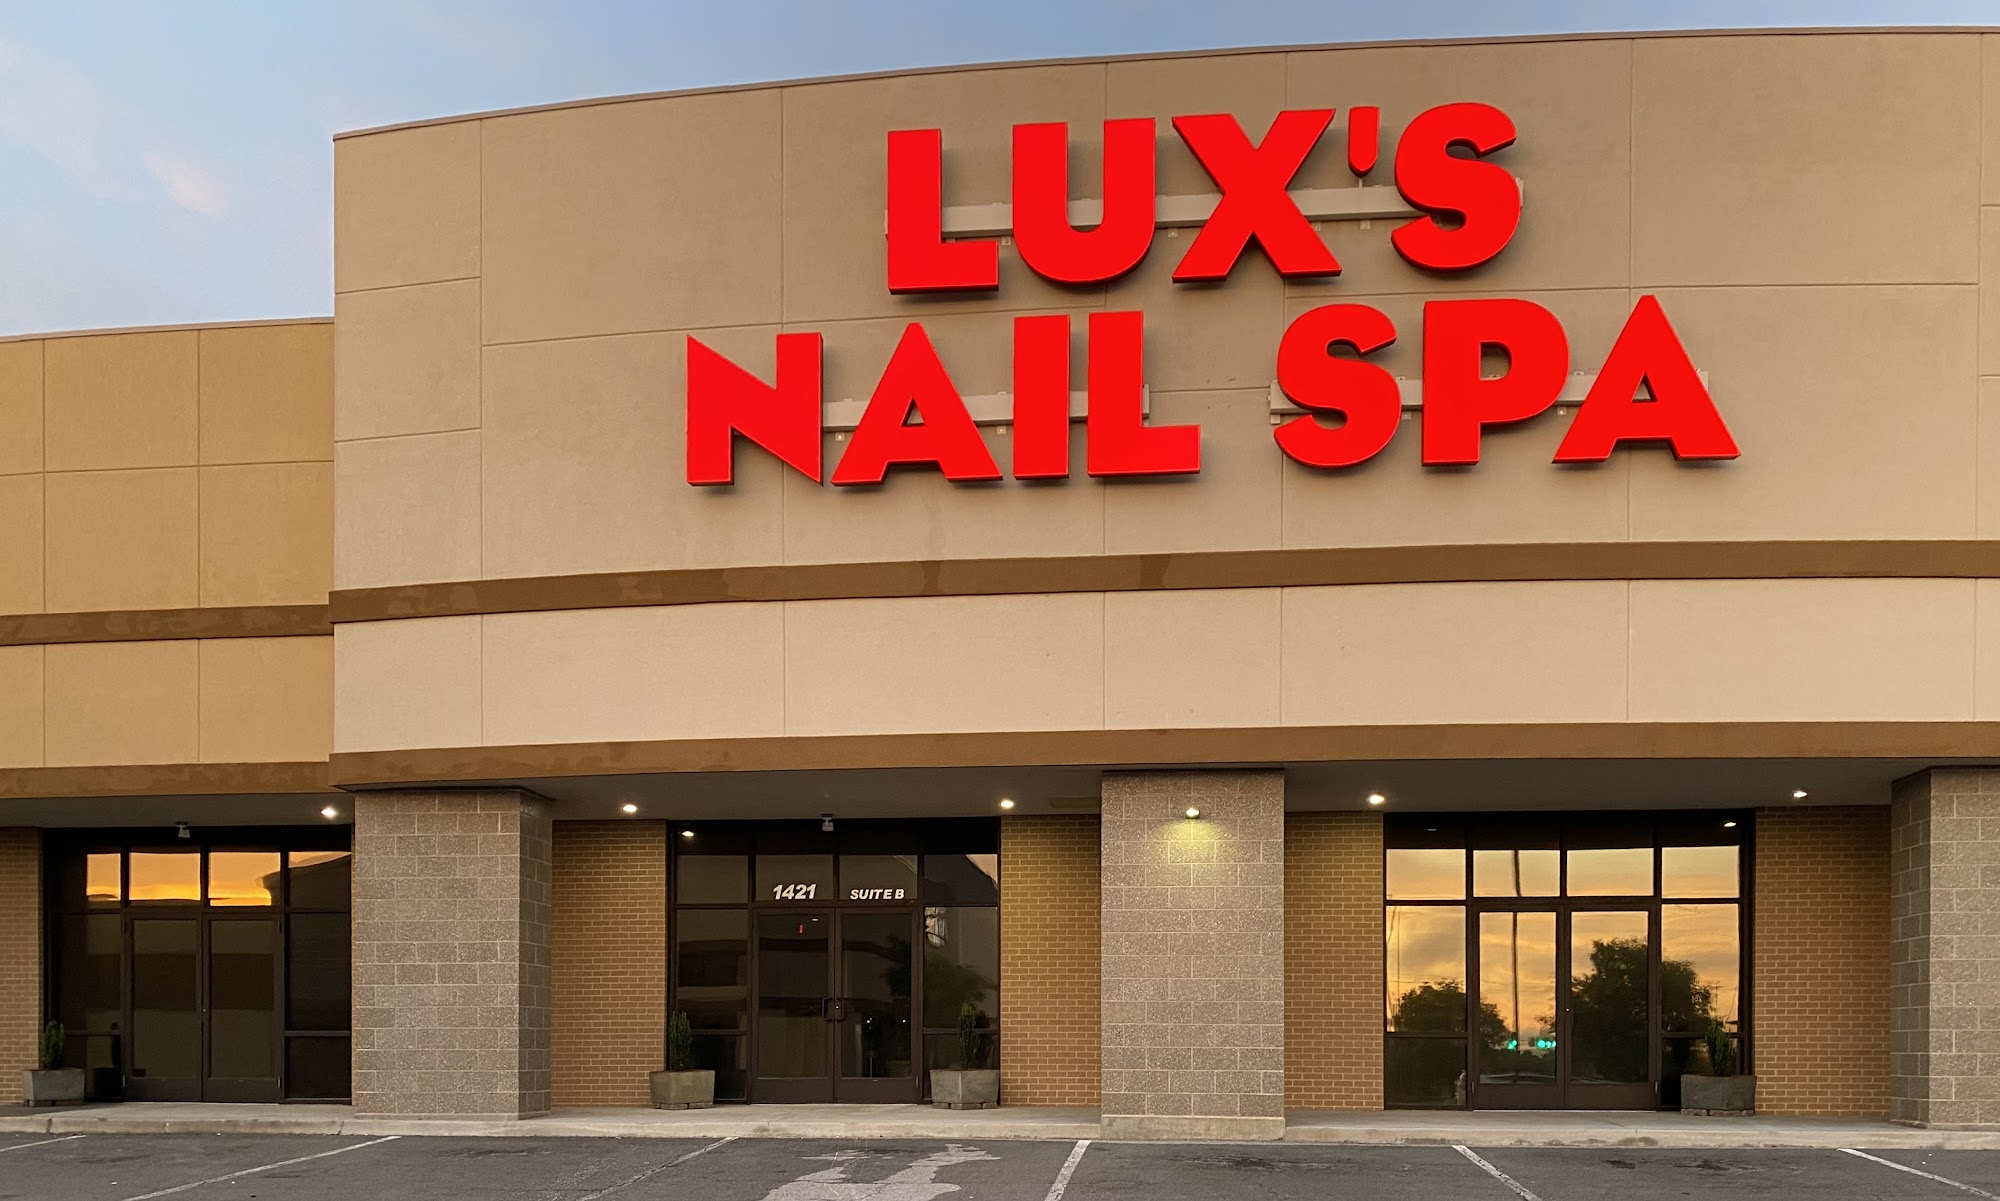 Lux's Nail spa